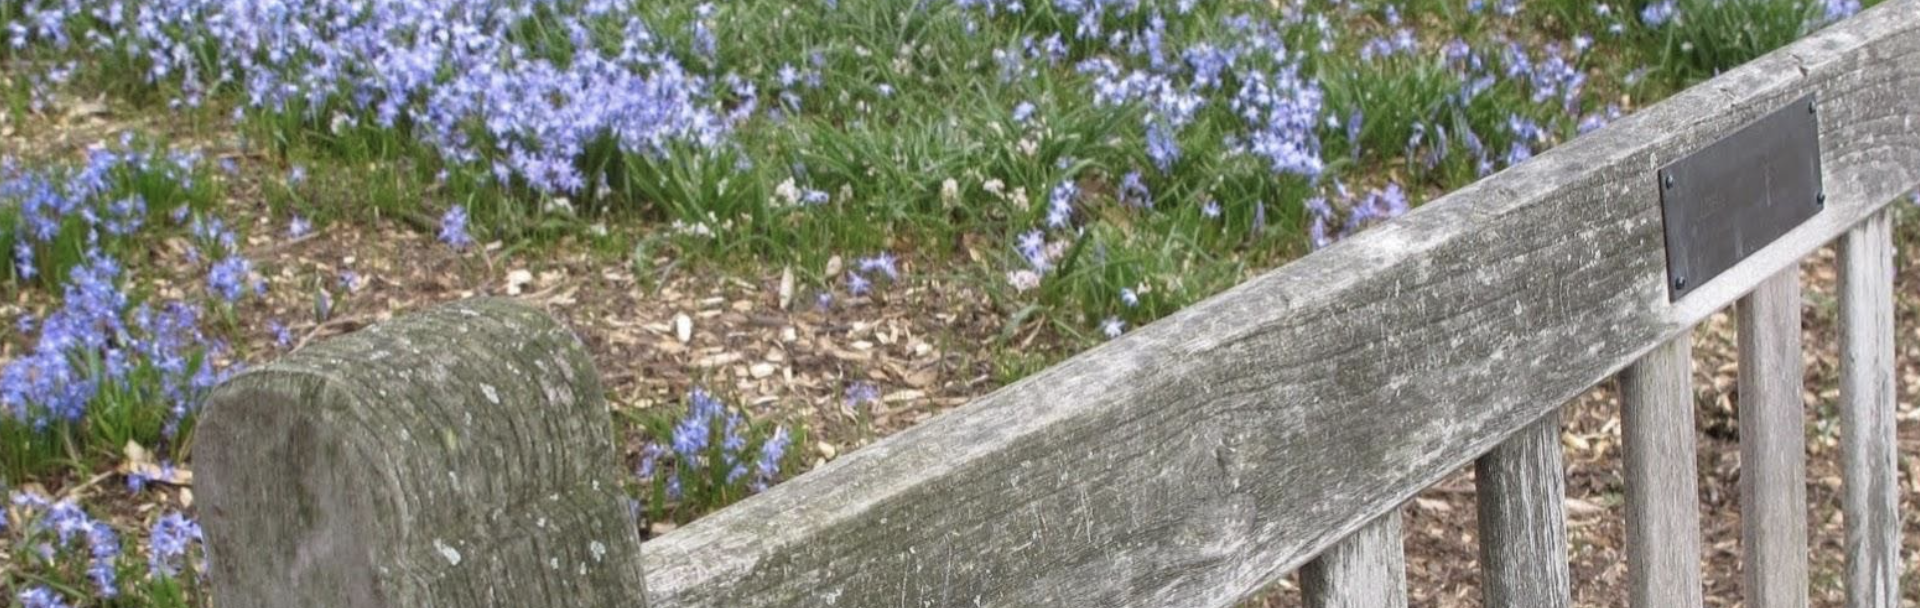 bench and flowers